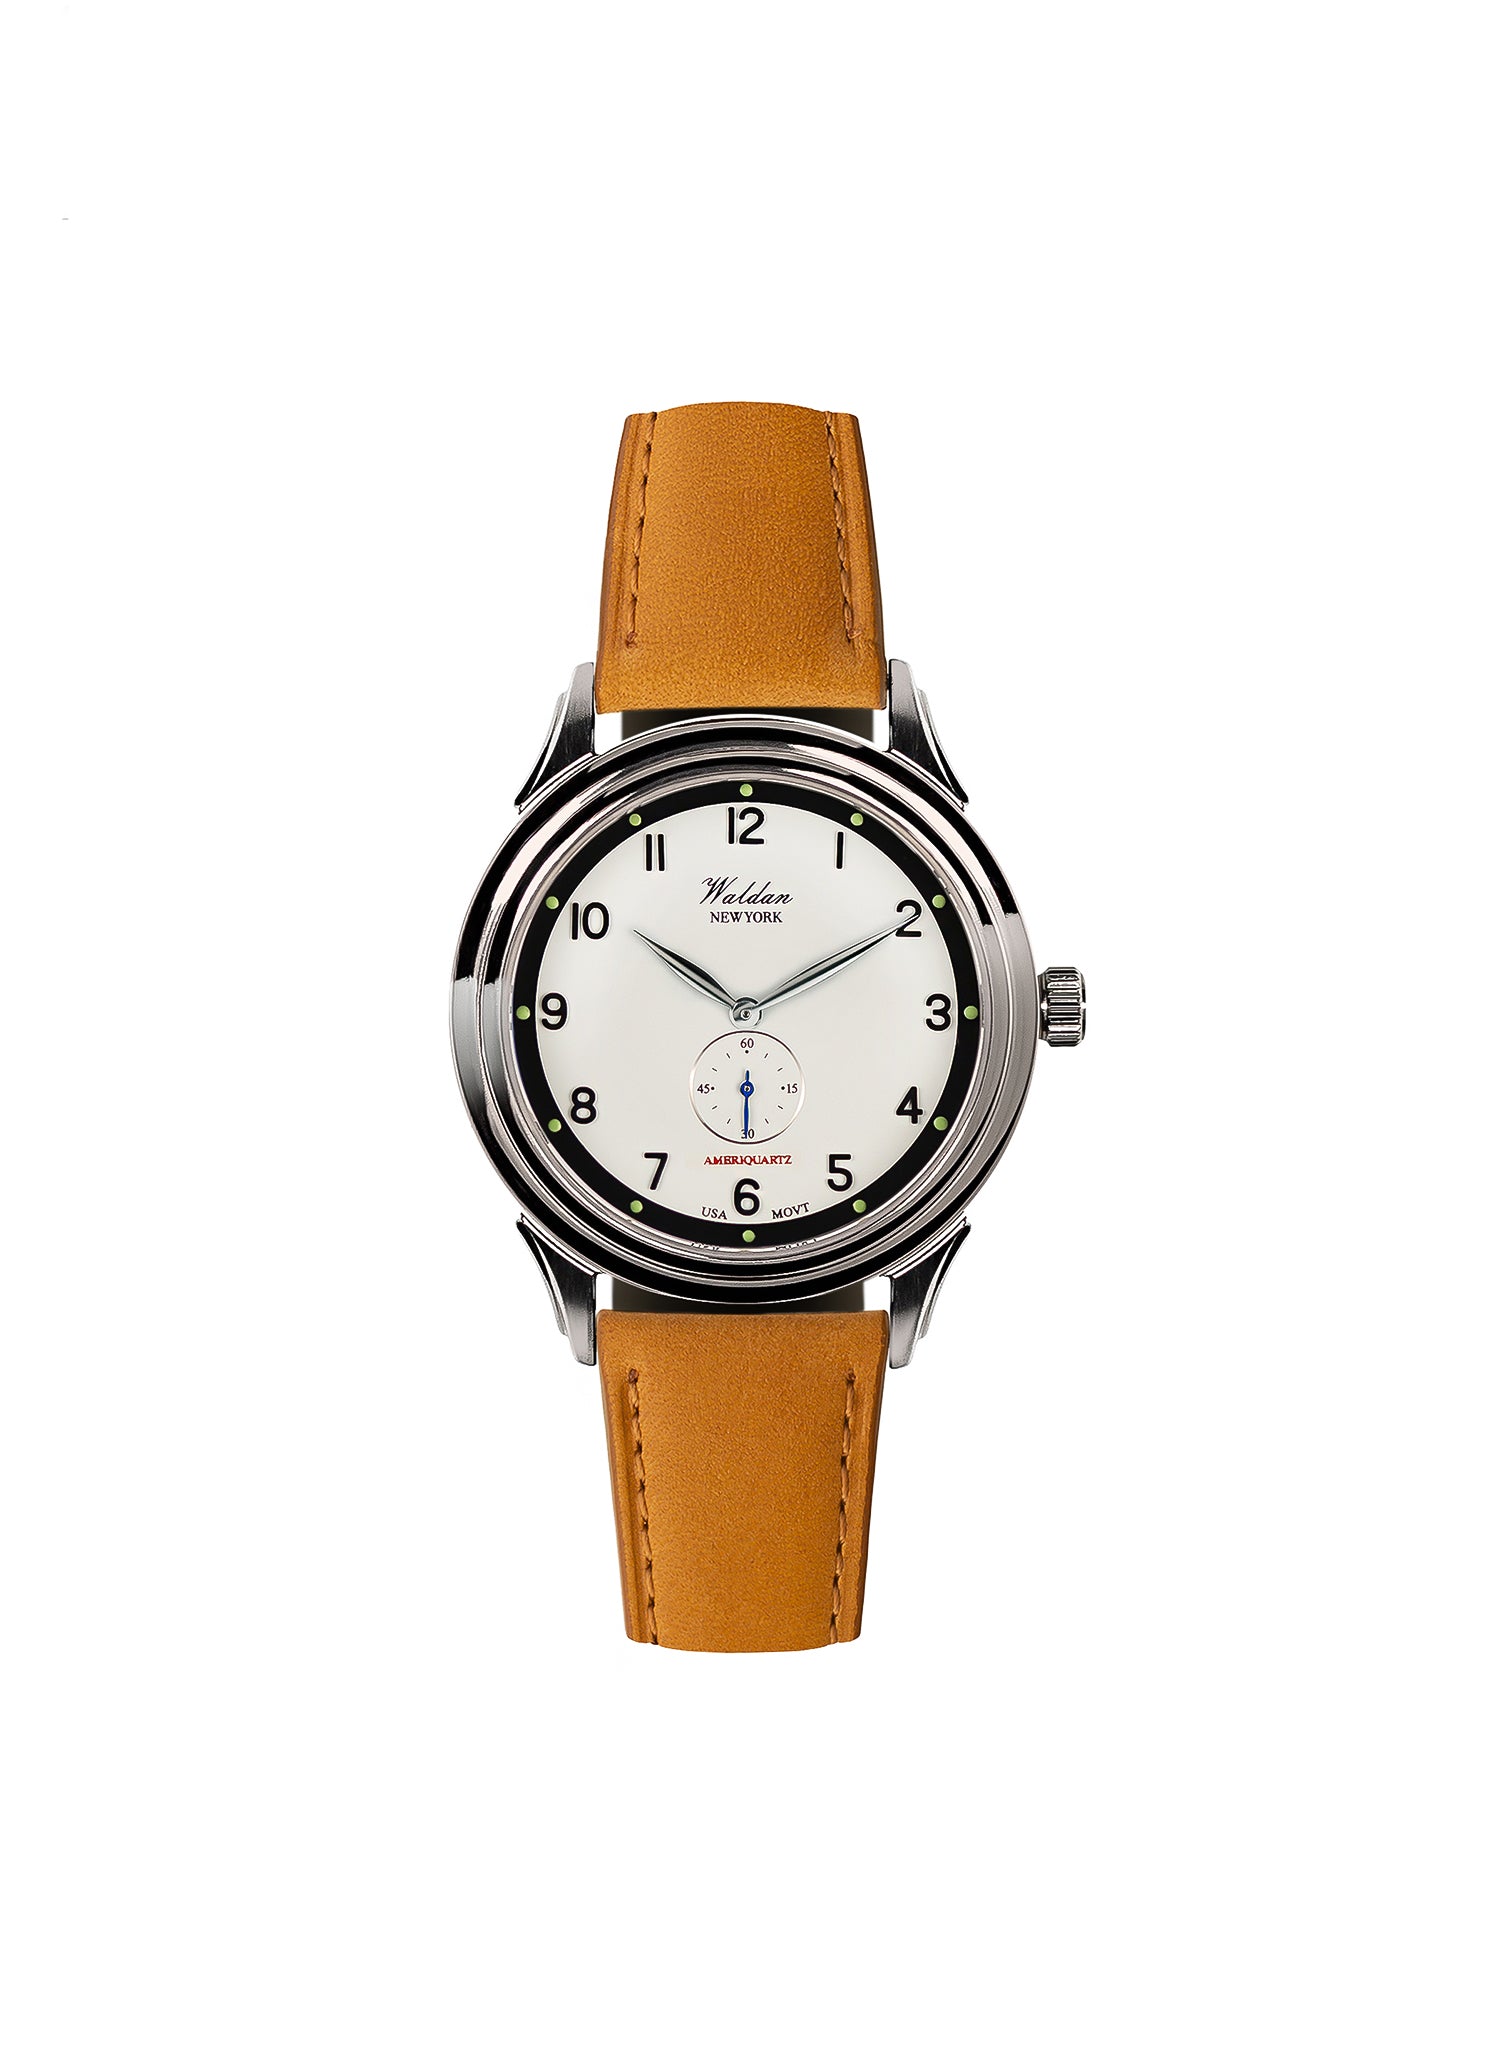 HERITAGE “PROFESSIONAL” REF. 0196OA - OFF WHITE